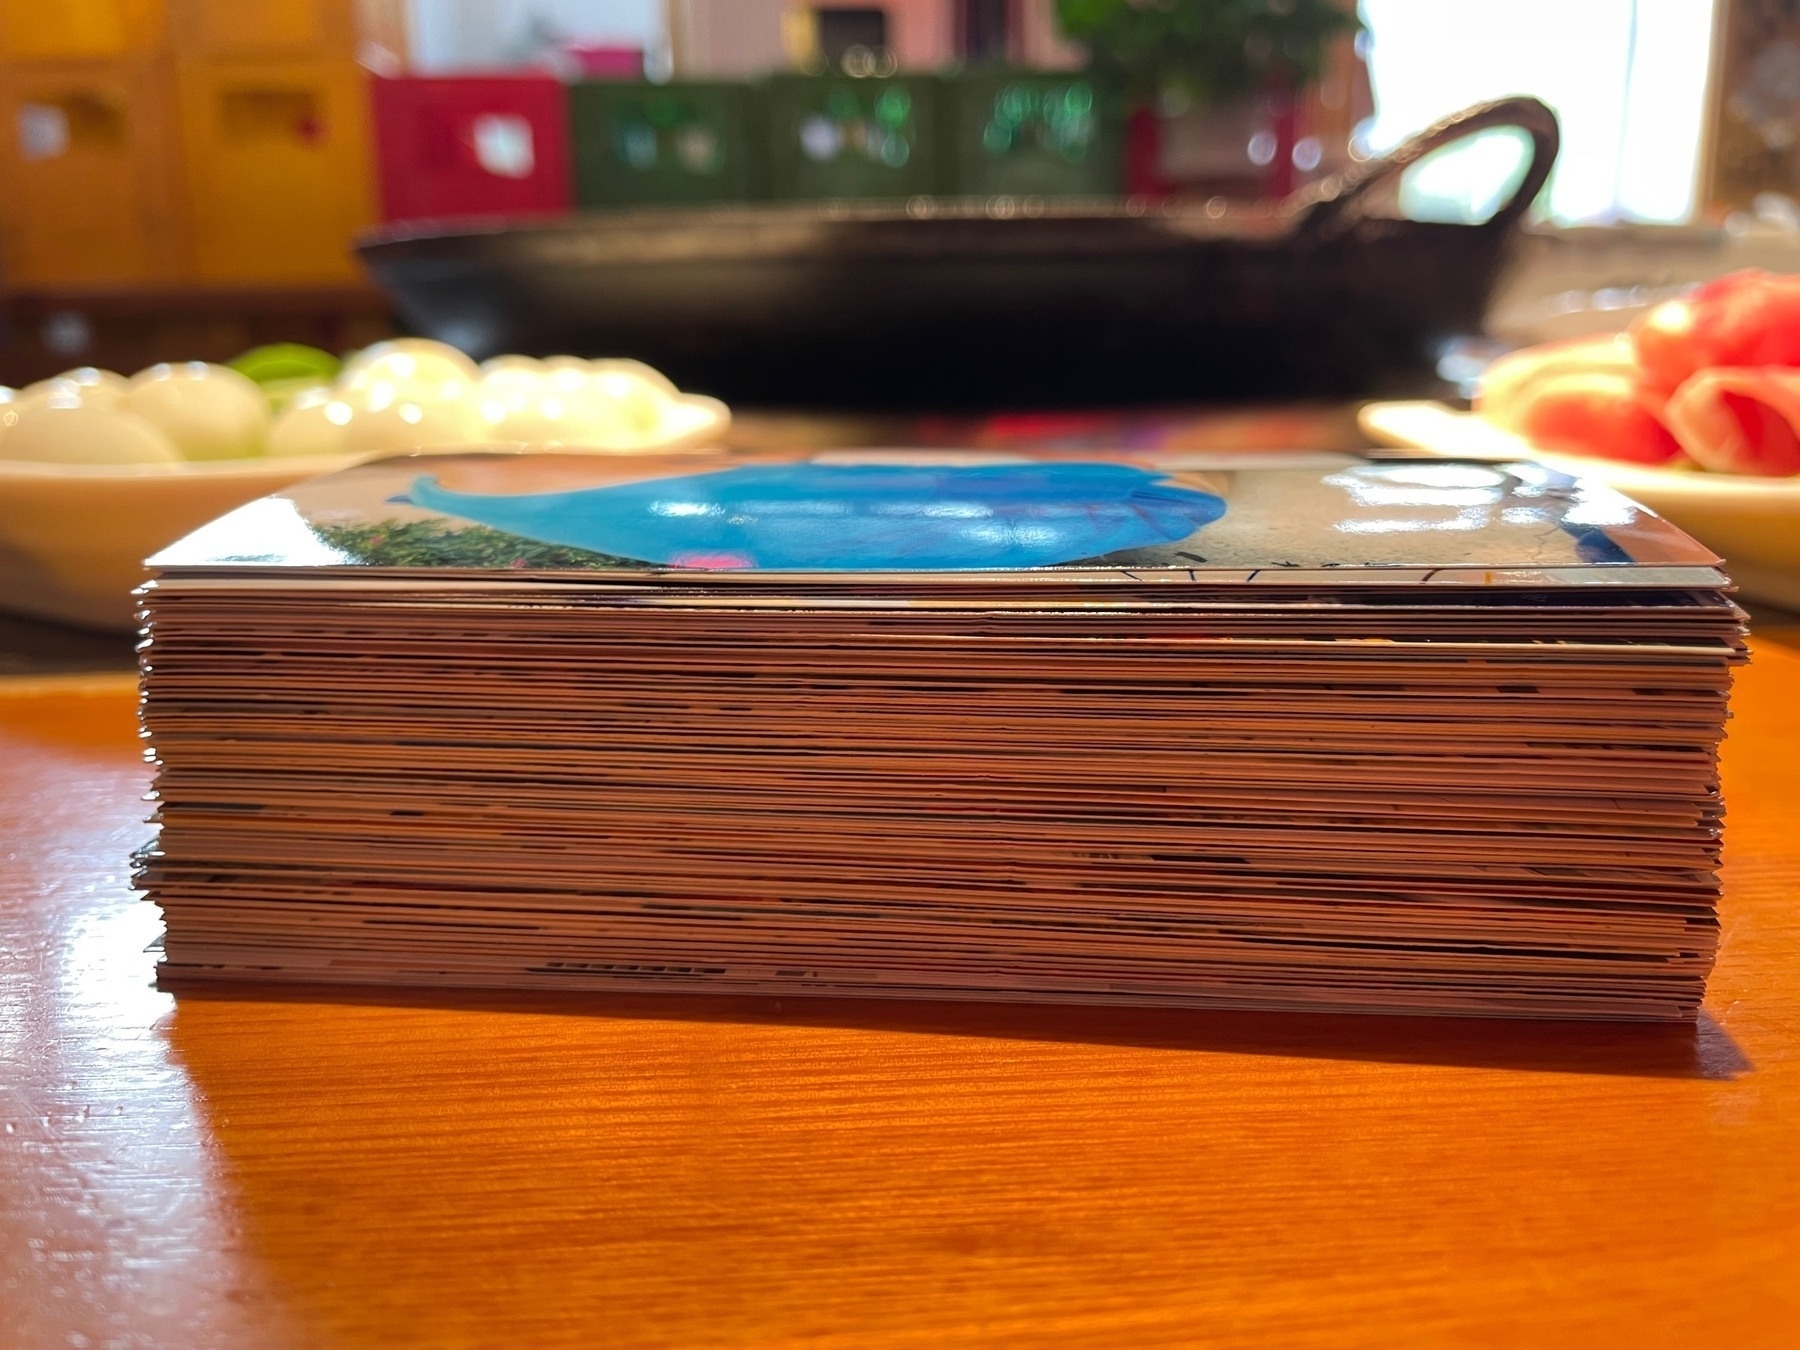 photo of a stack of printed photos